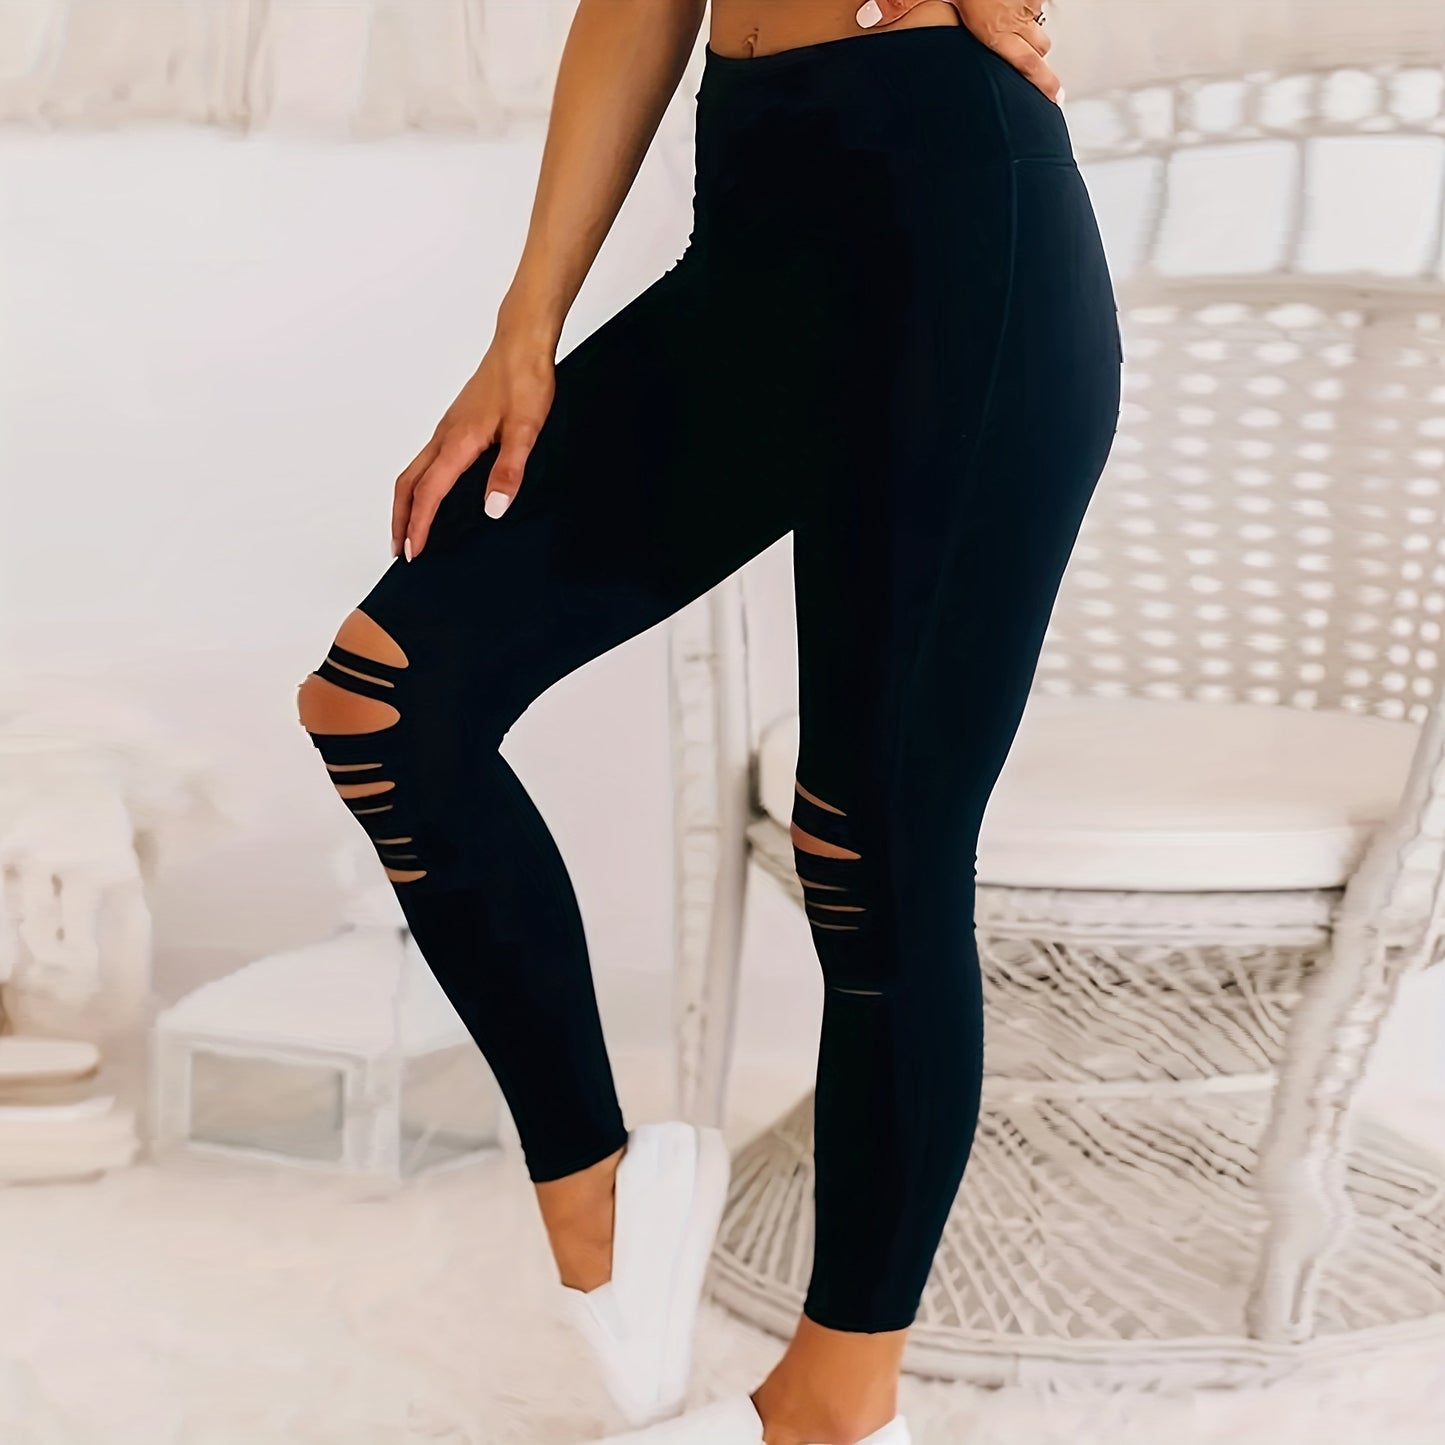 Stretchy Yoga Pants for Sports and Workouts